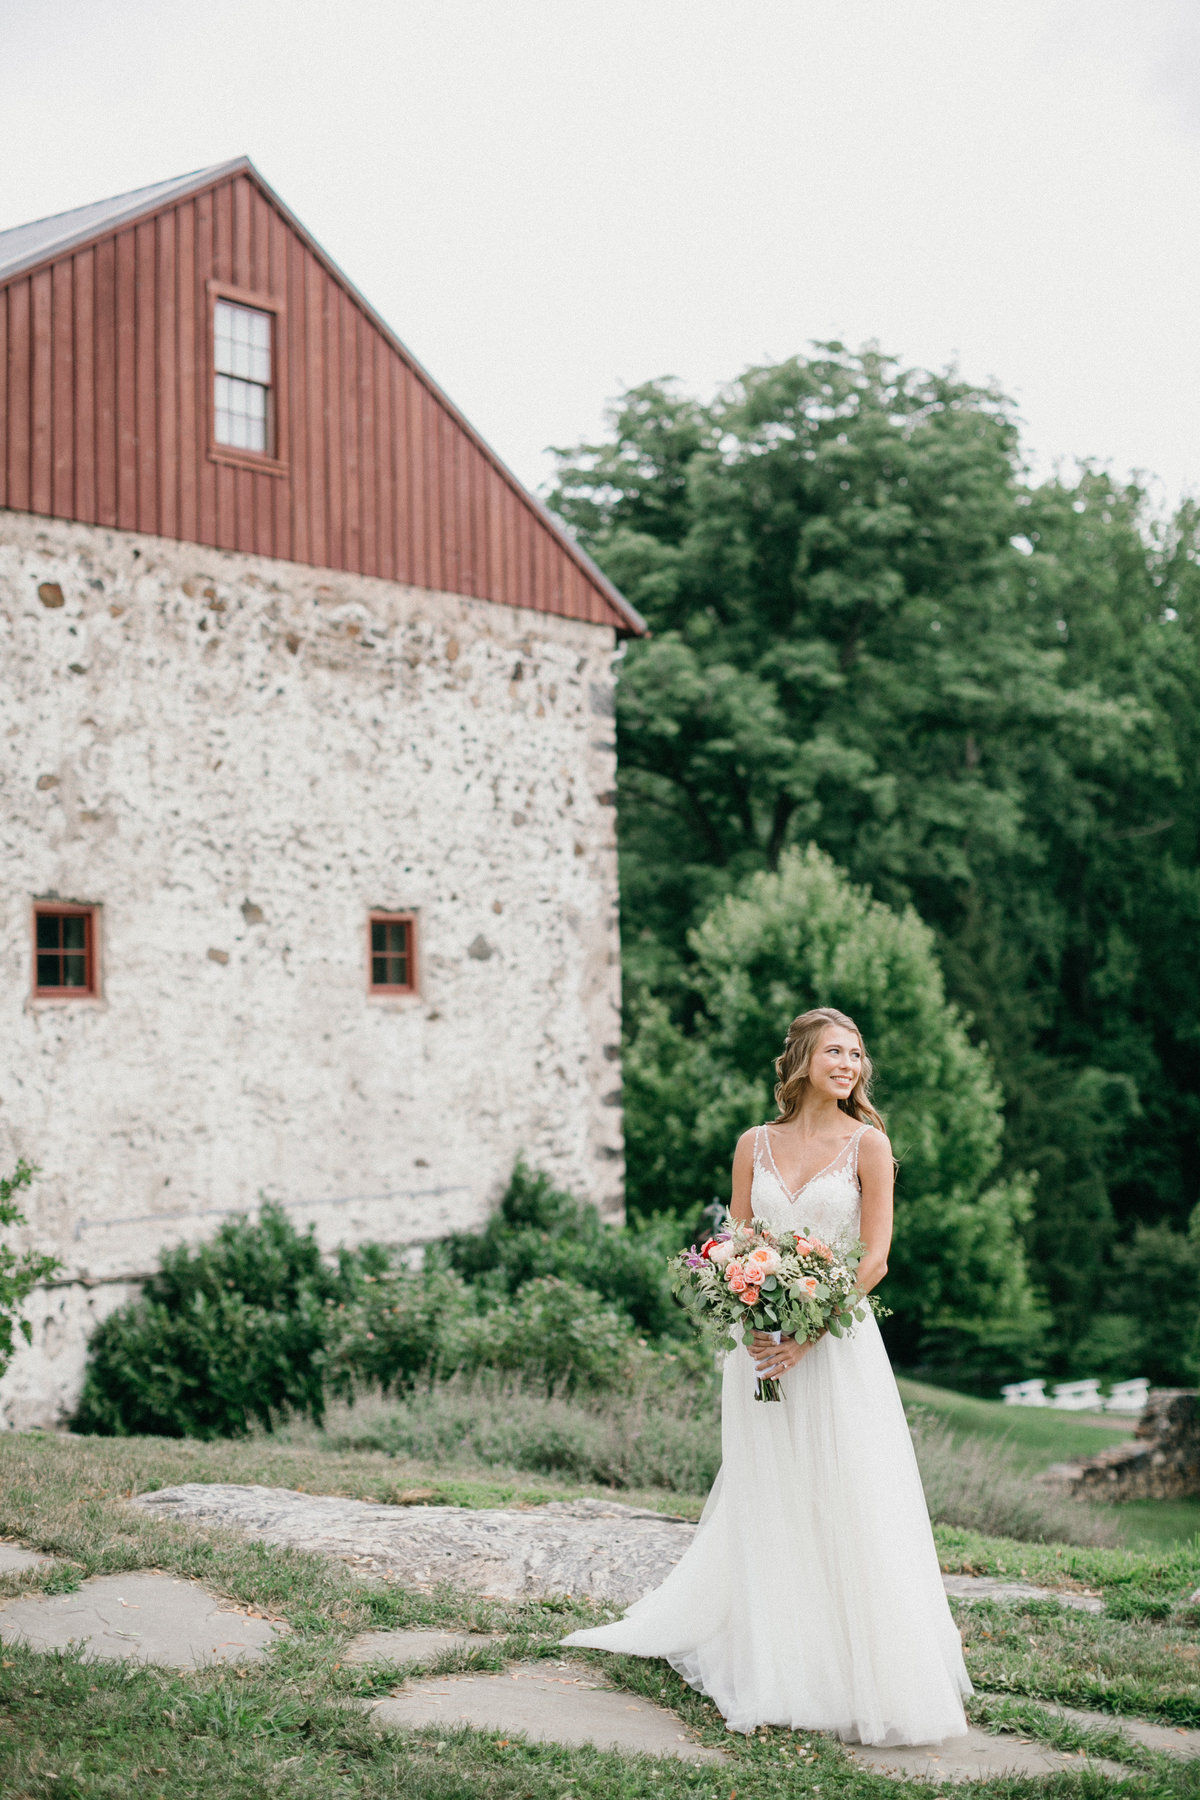 Our bride, Katrina looked absolutely stunning on her wedding day at Grace Winery.